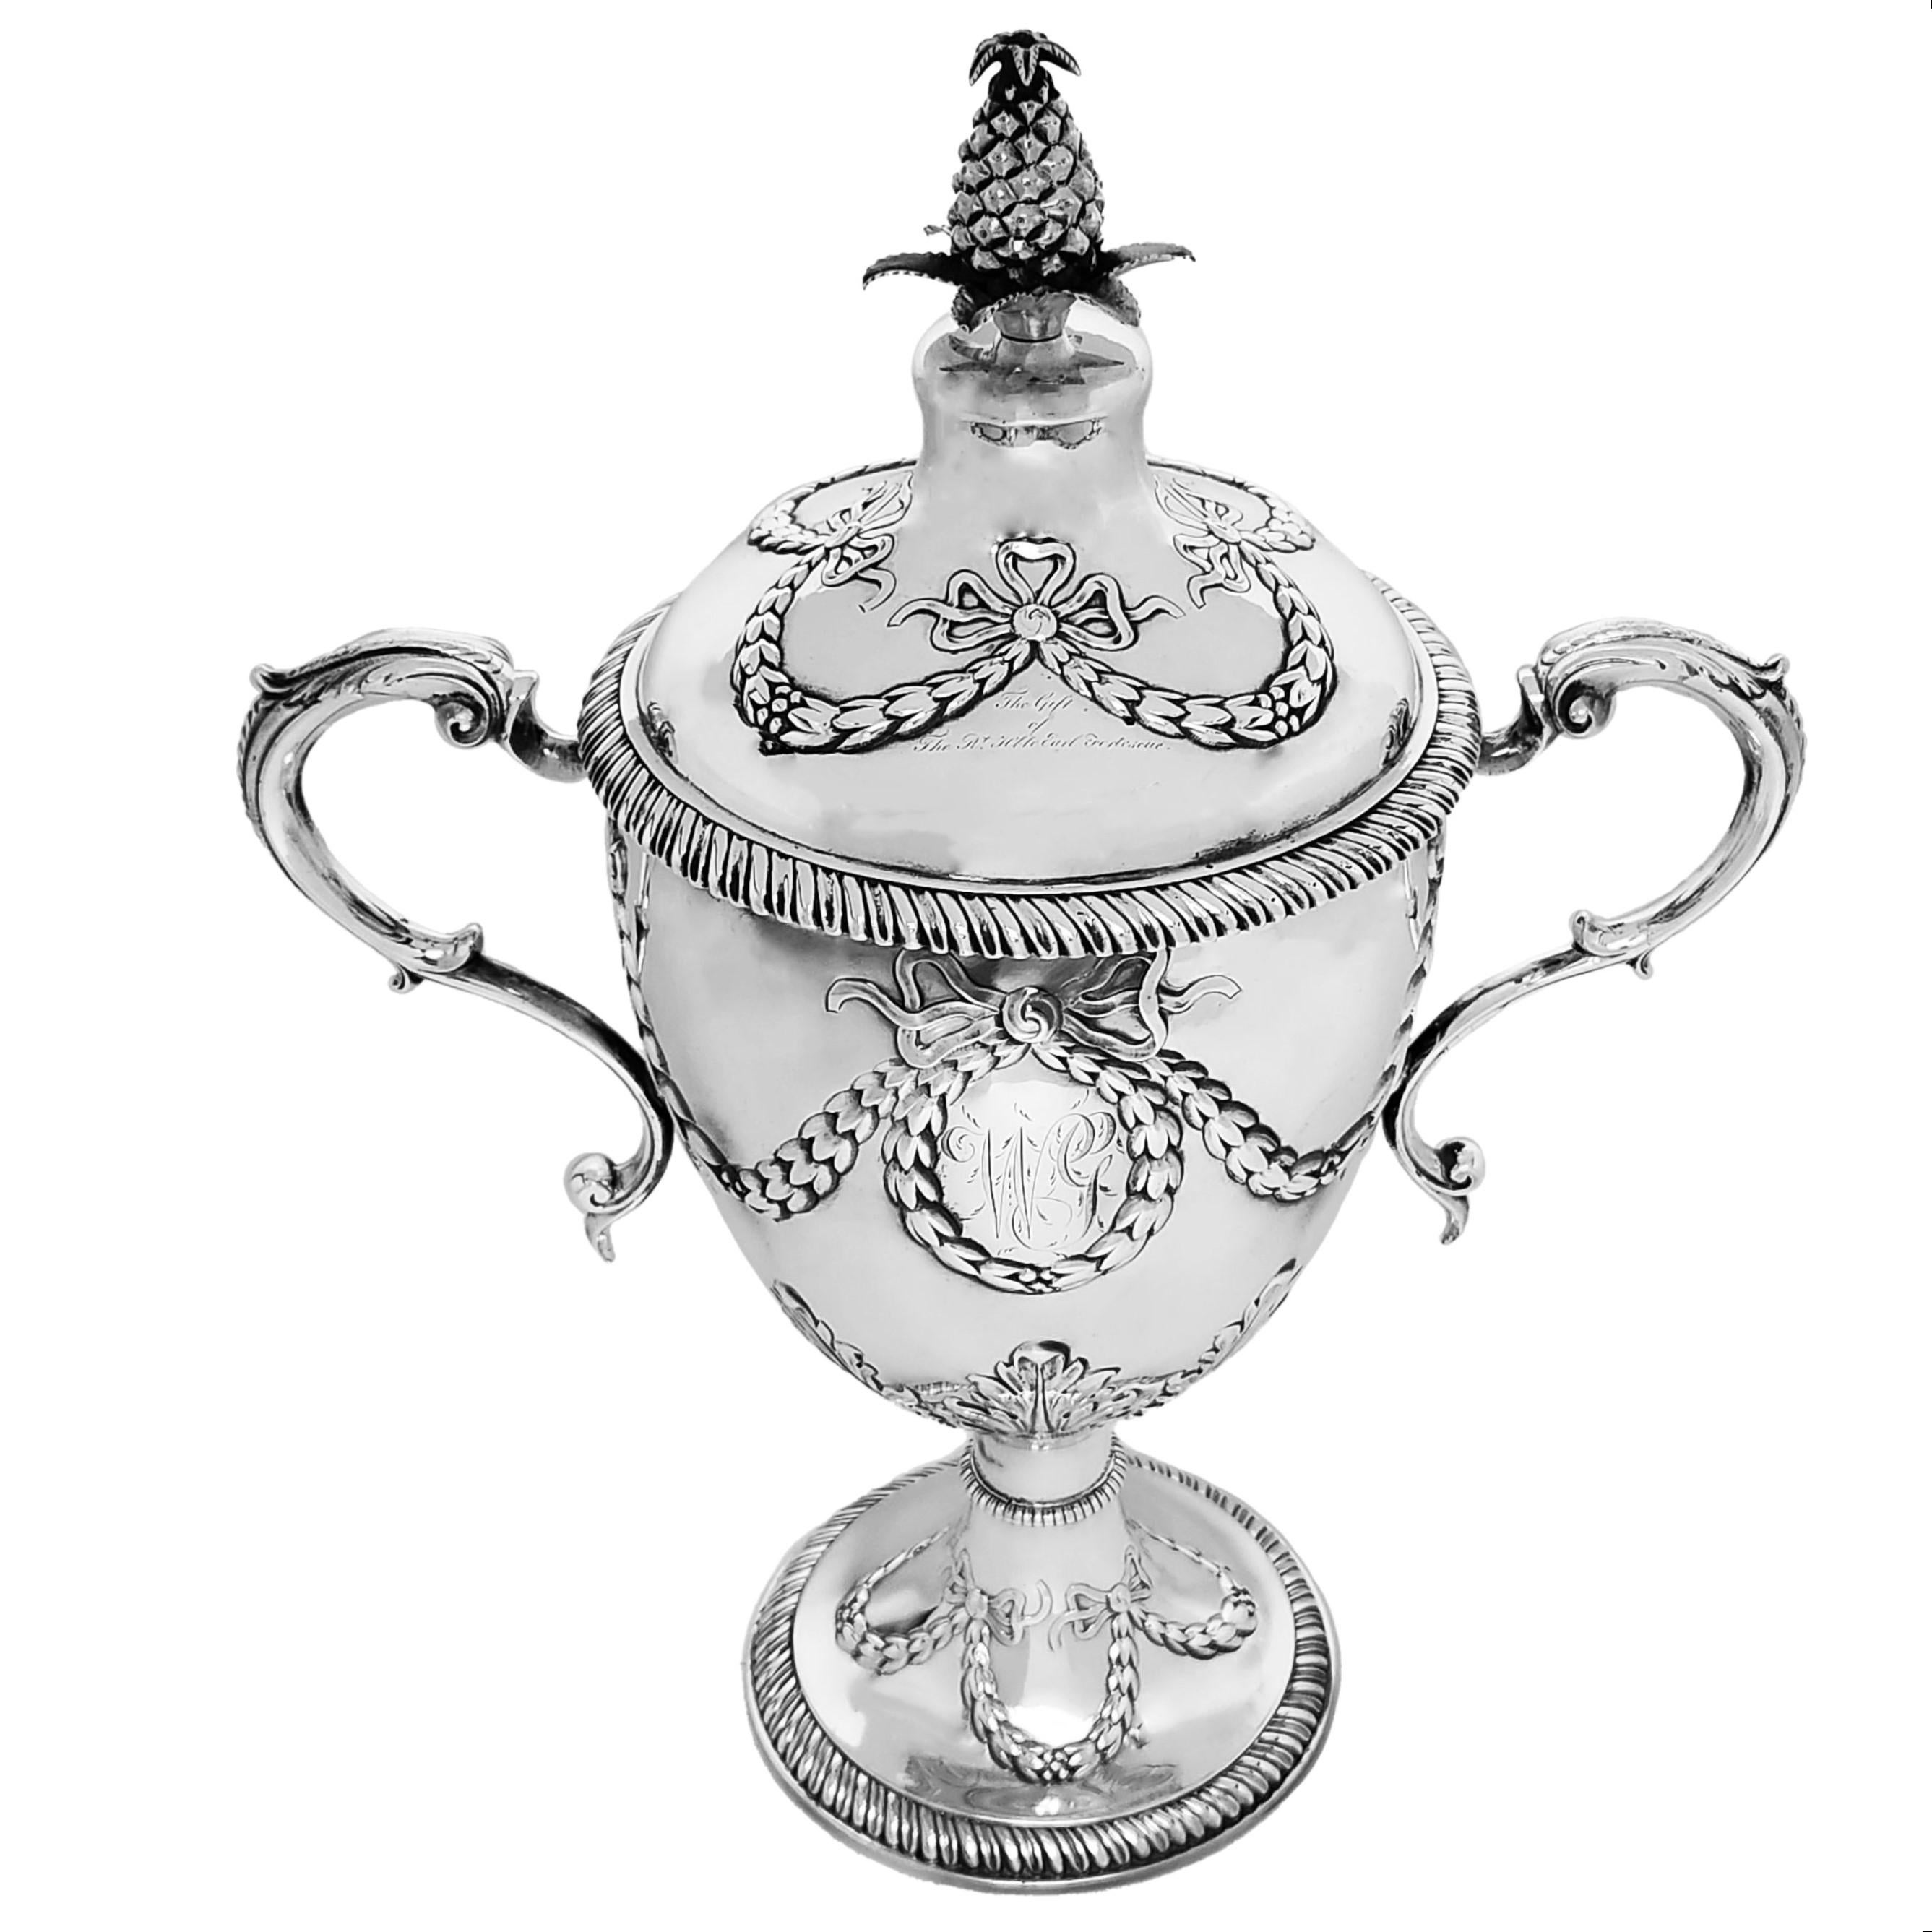 An Antique George III Sterling Silver Cup & Cover embellished with a classic swag and bow chased design. The Swags encircle oval cartouches on both sides of the trophy and each cartouche has a monogram engraved in the centre. The swag and bow design